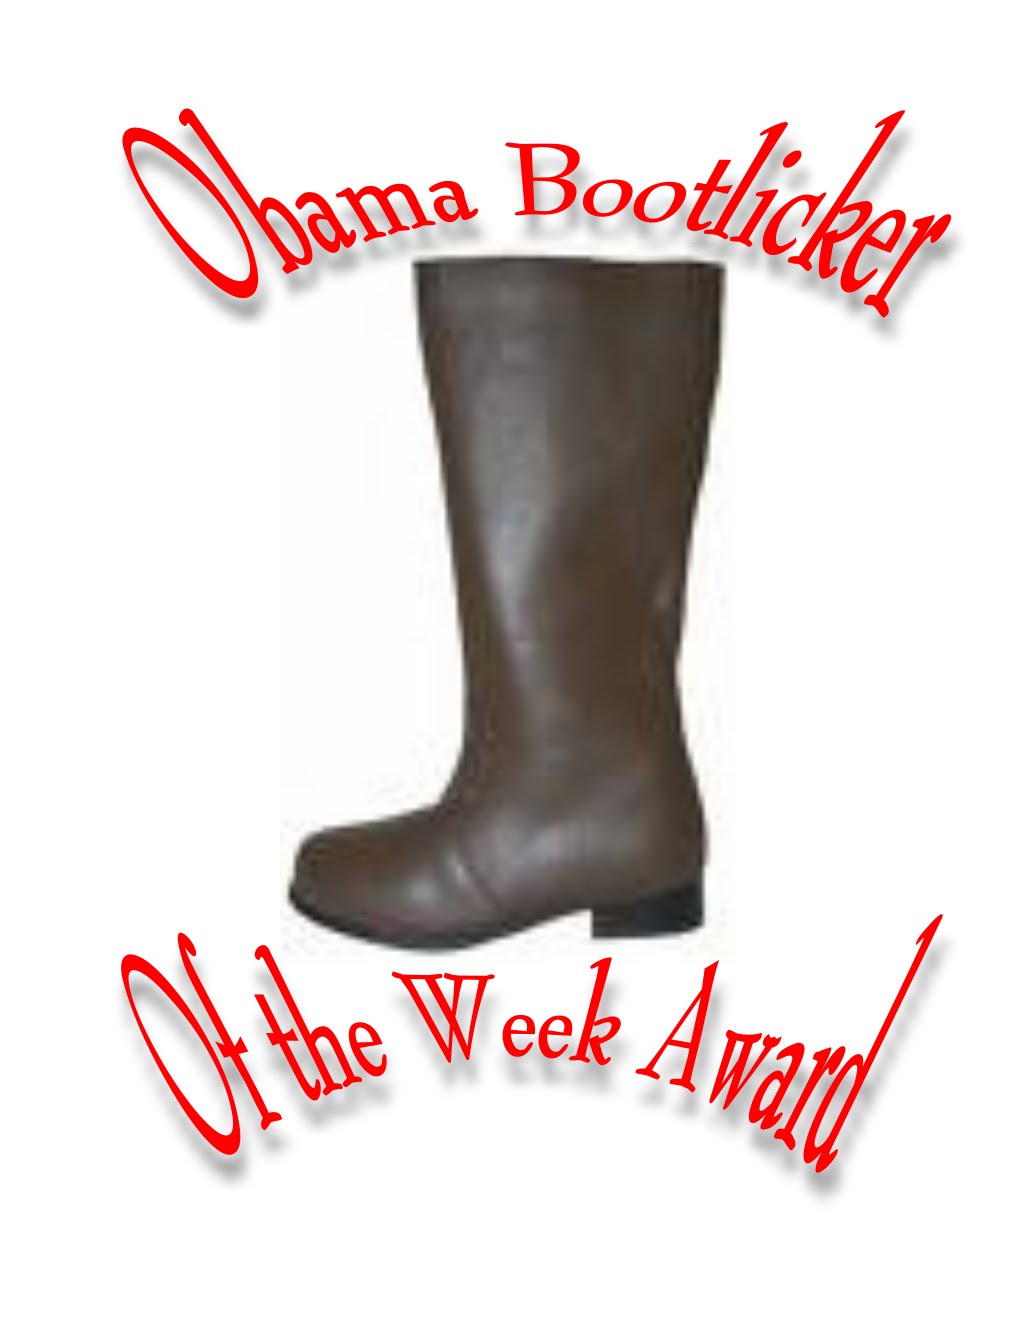 Boot+licker+of+the+week+Award.BMP